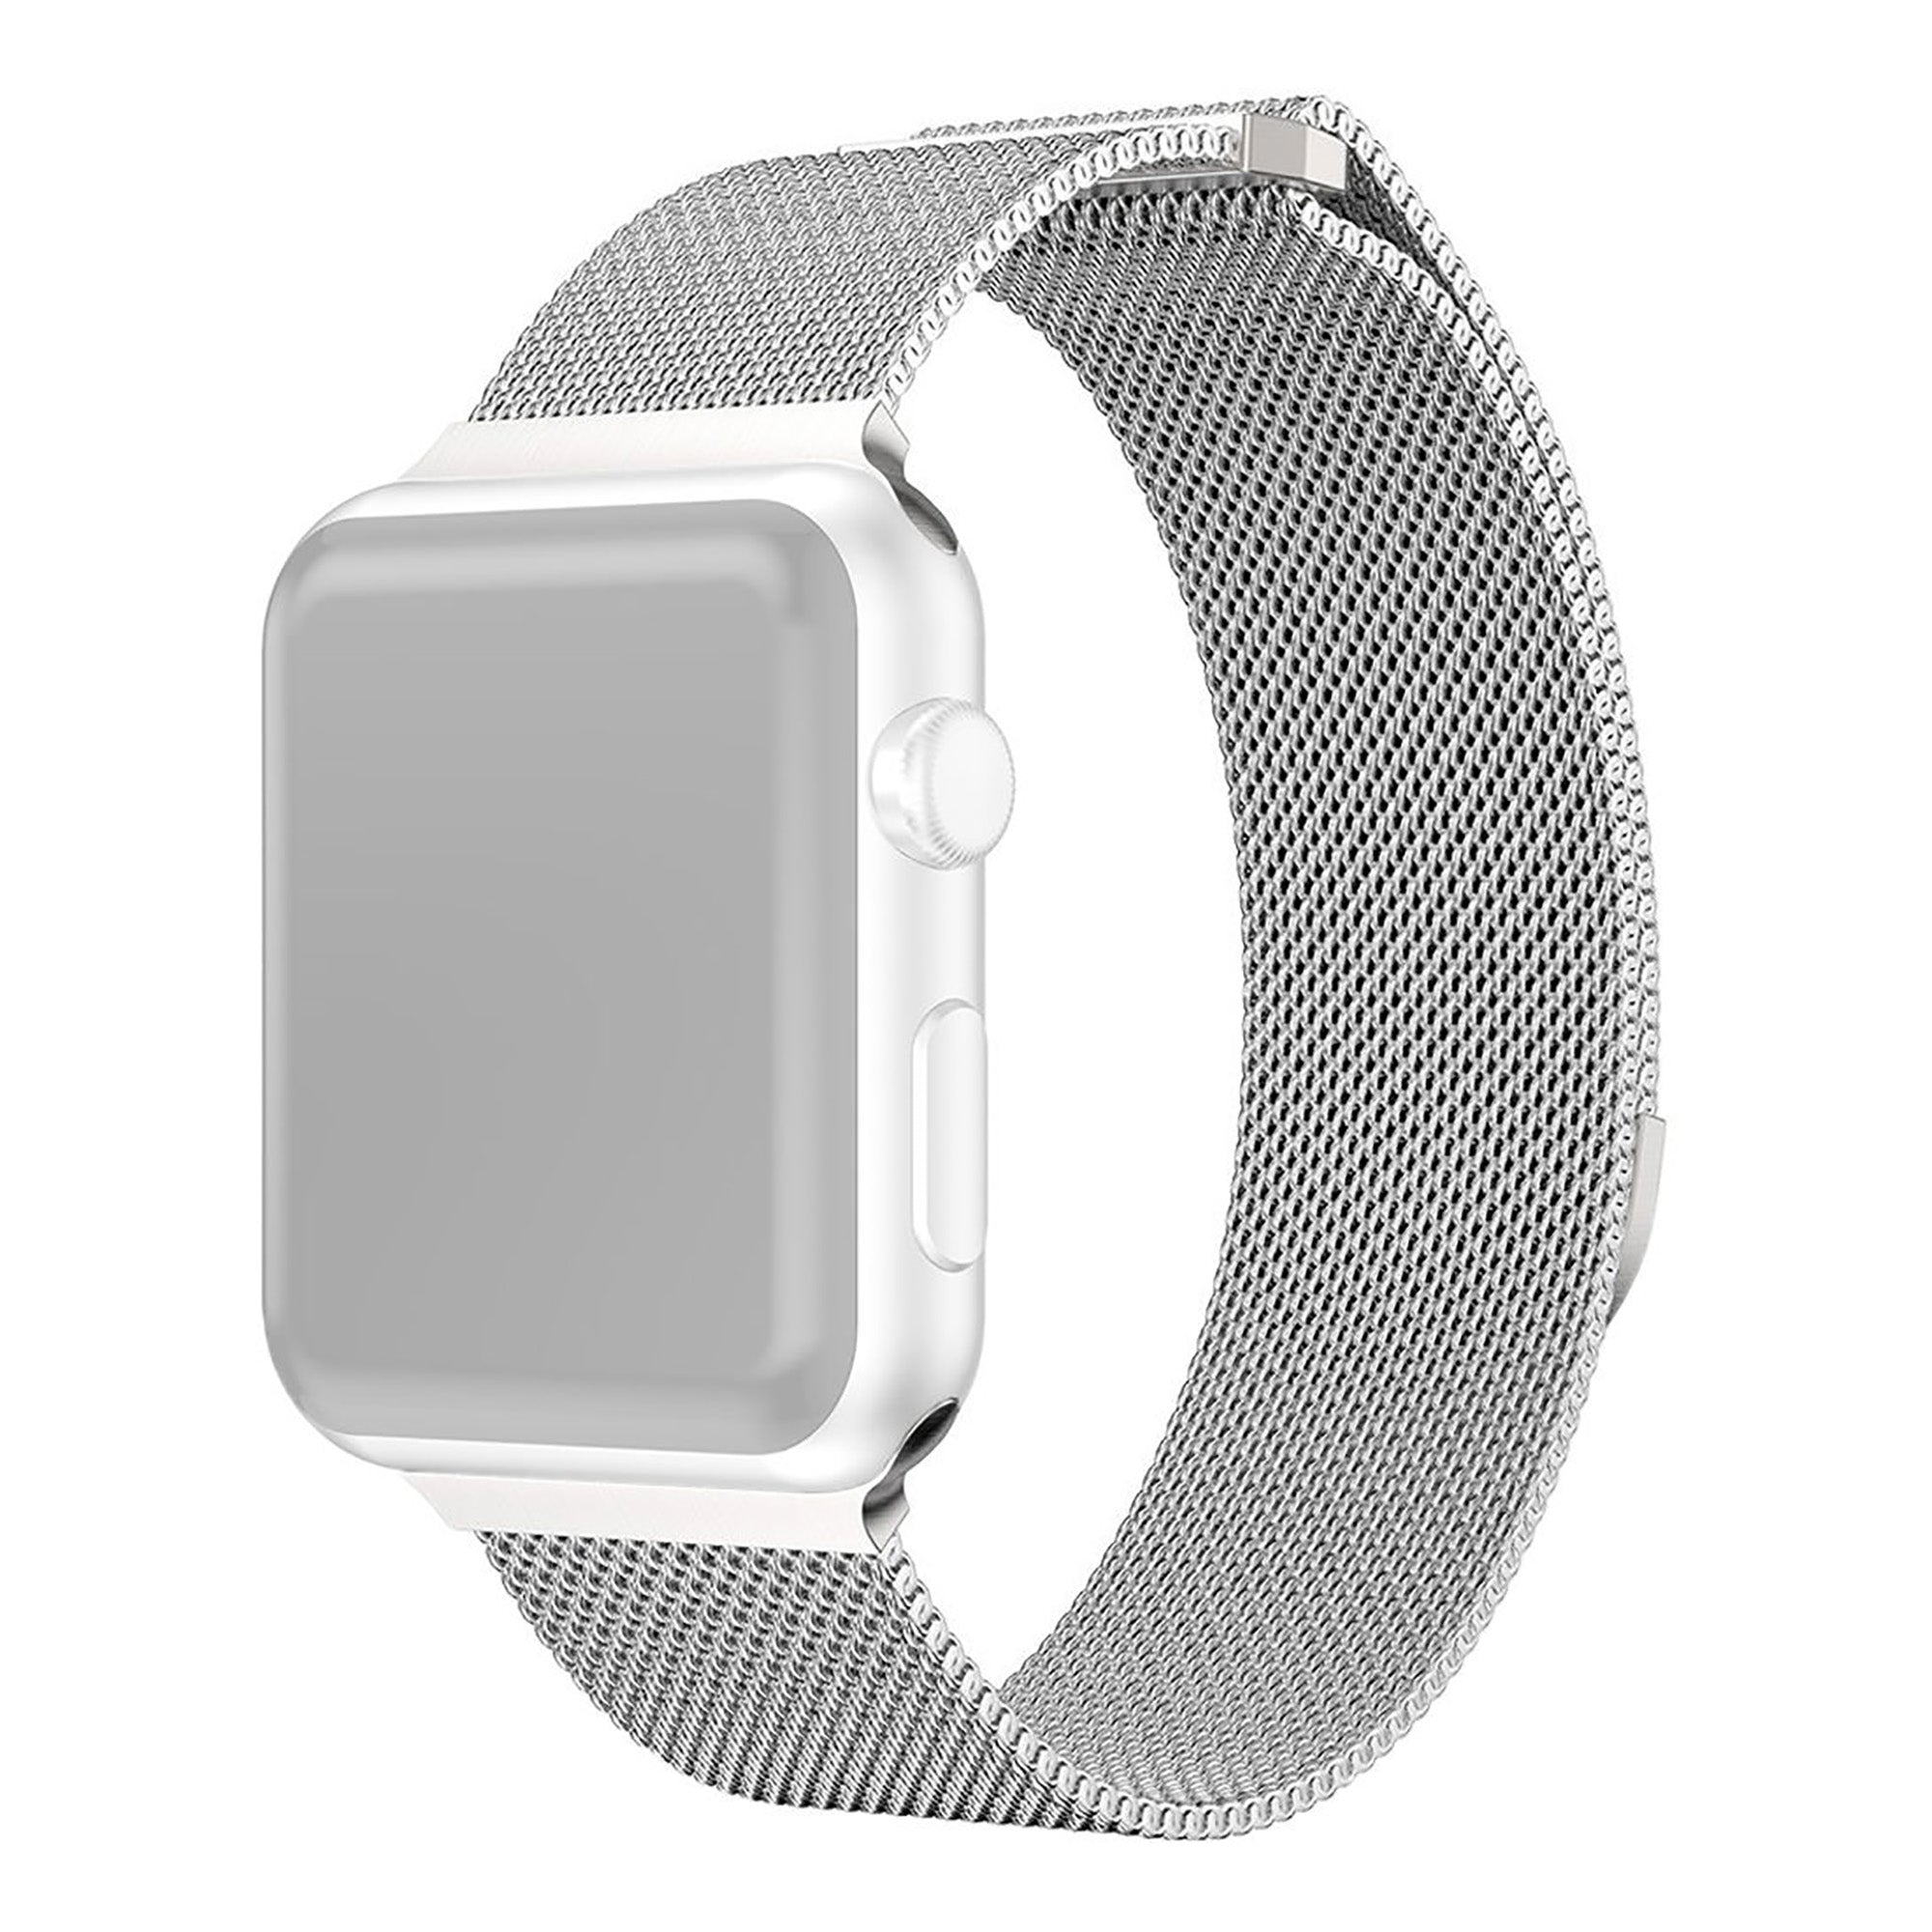 Steel watch band. Apple watch 6 Series Stainless Steel 44mm Silver. Silver Stainless Steel Apple watch. Apple watch Silver. Apple watch Series 6 40mm Silver Stainless Steel.